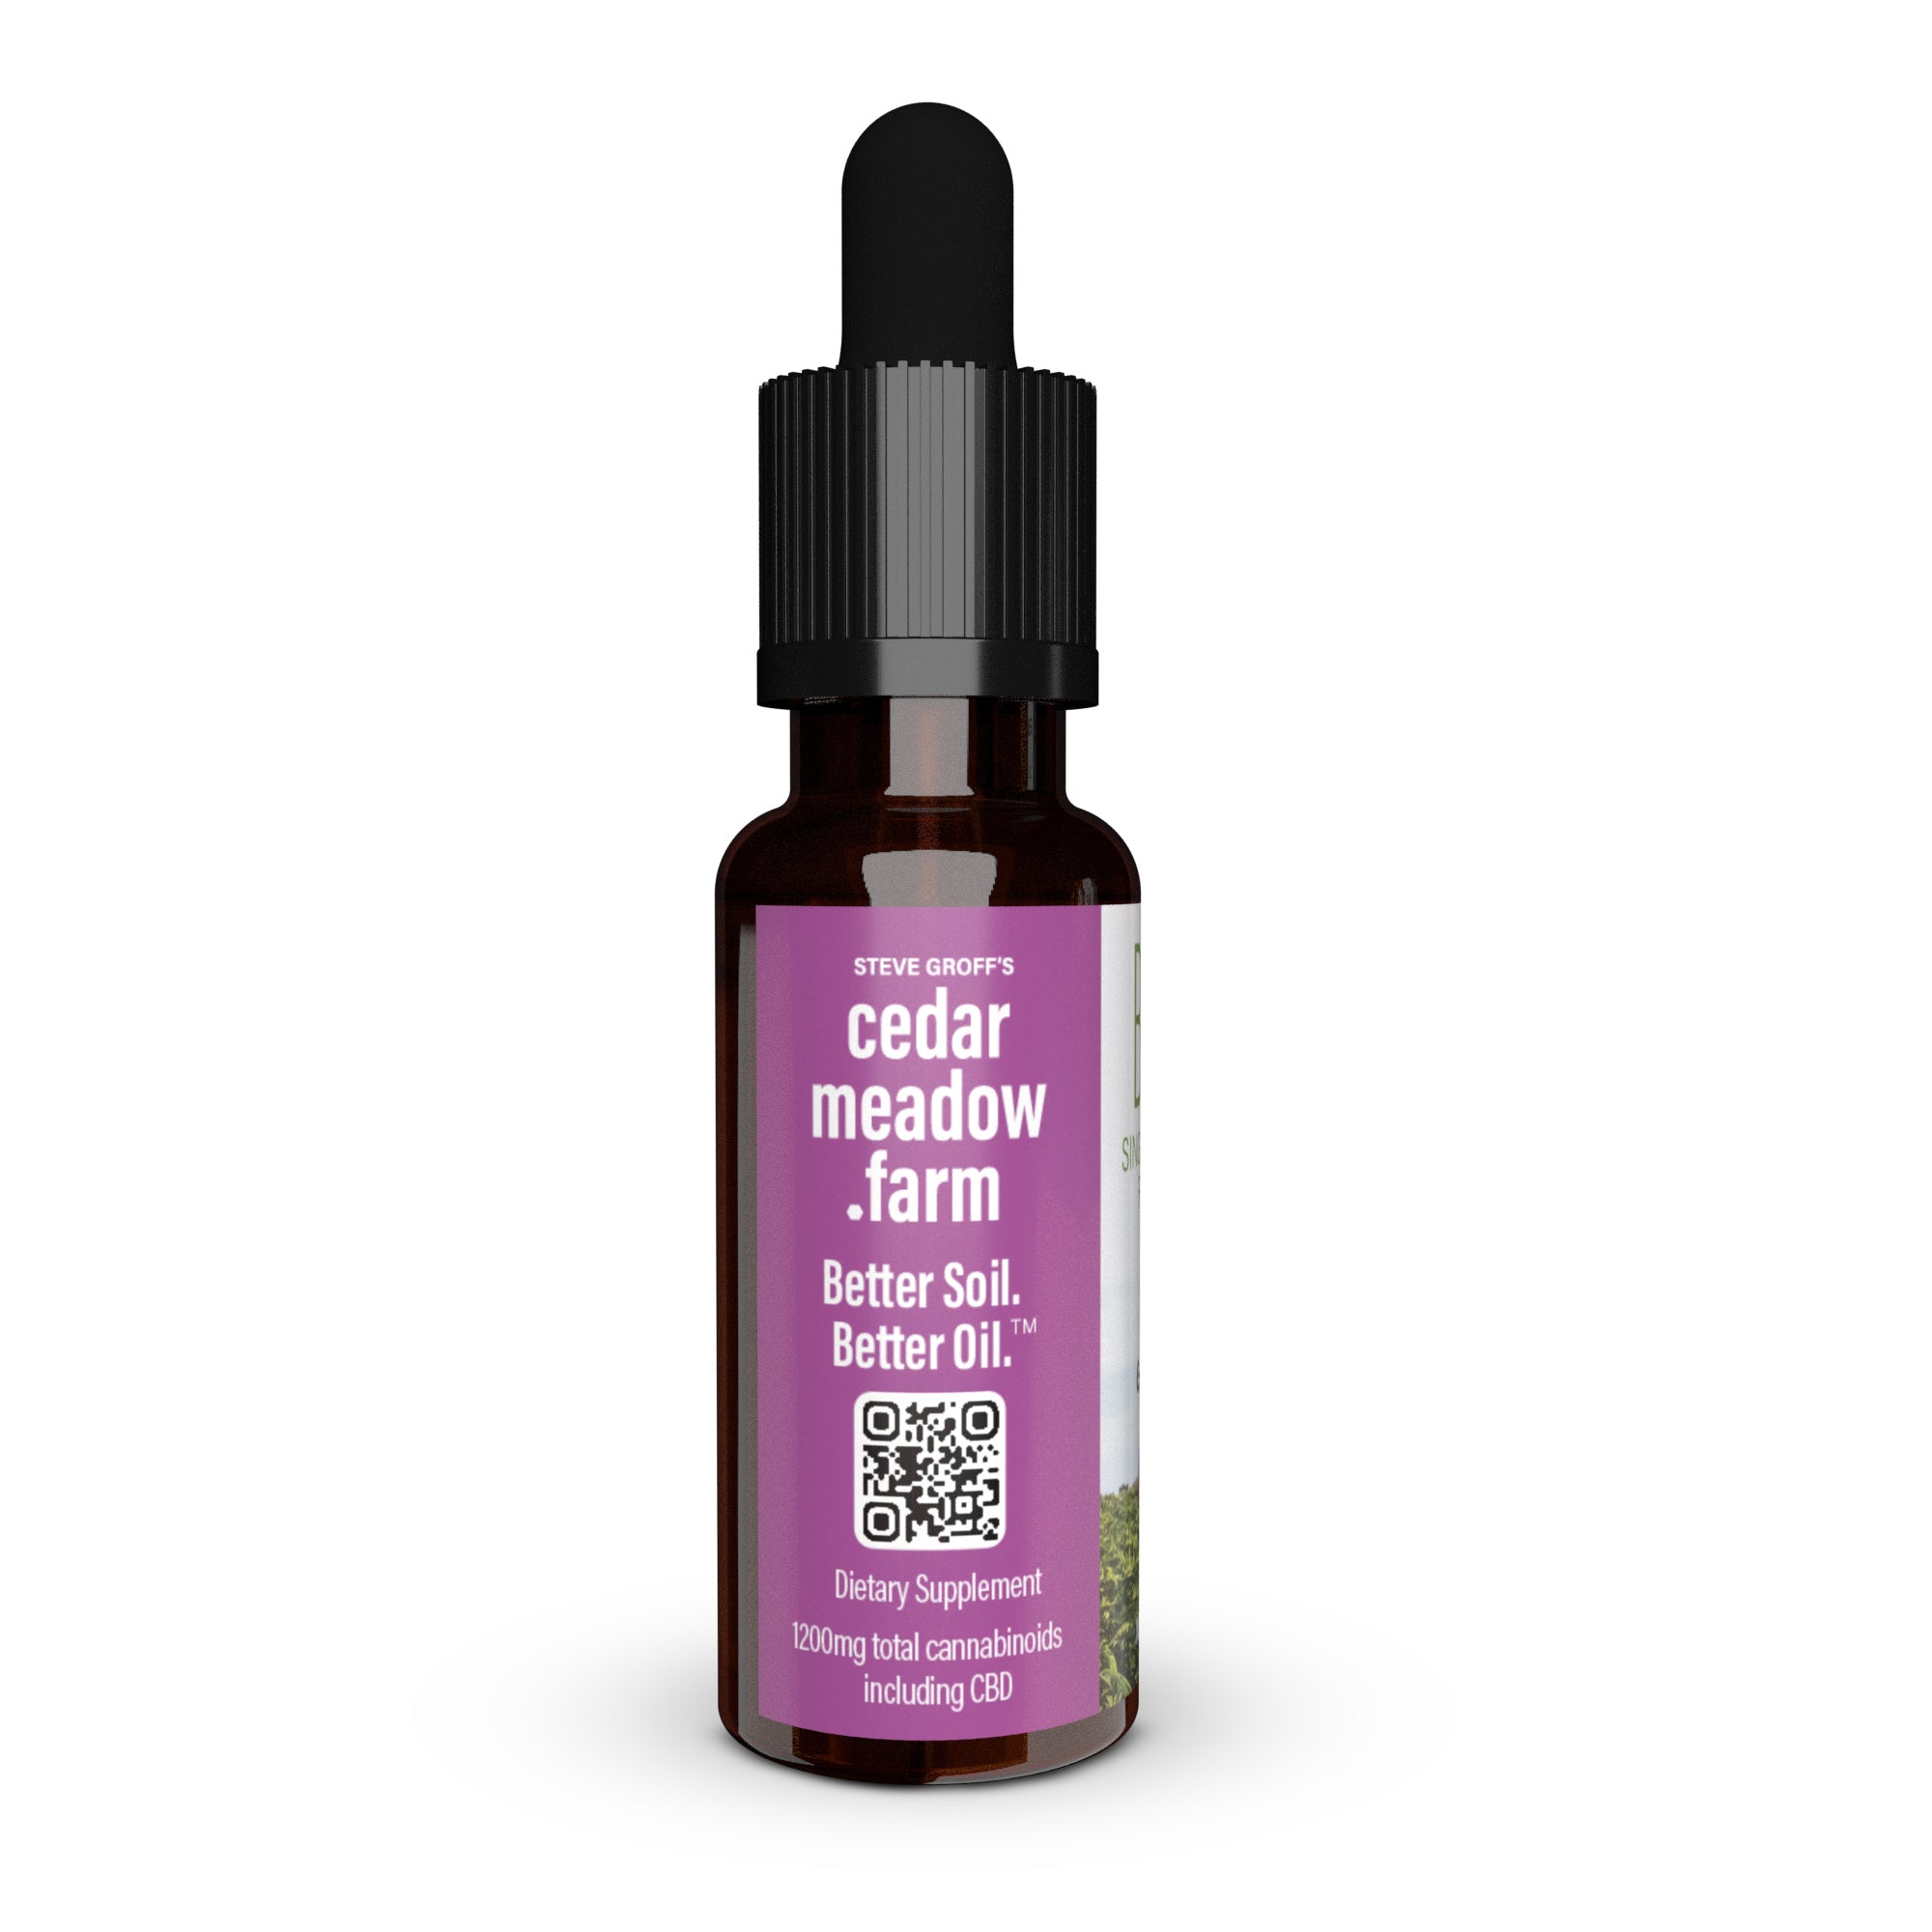 CBD Oil Bacon Flavor-A crisp new look for the same incredible oil that you've come to love!We made BETTER just for you. Full Spectrum: All of the naturally-occurring compounds in the -Cedar Meadow Farm